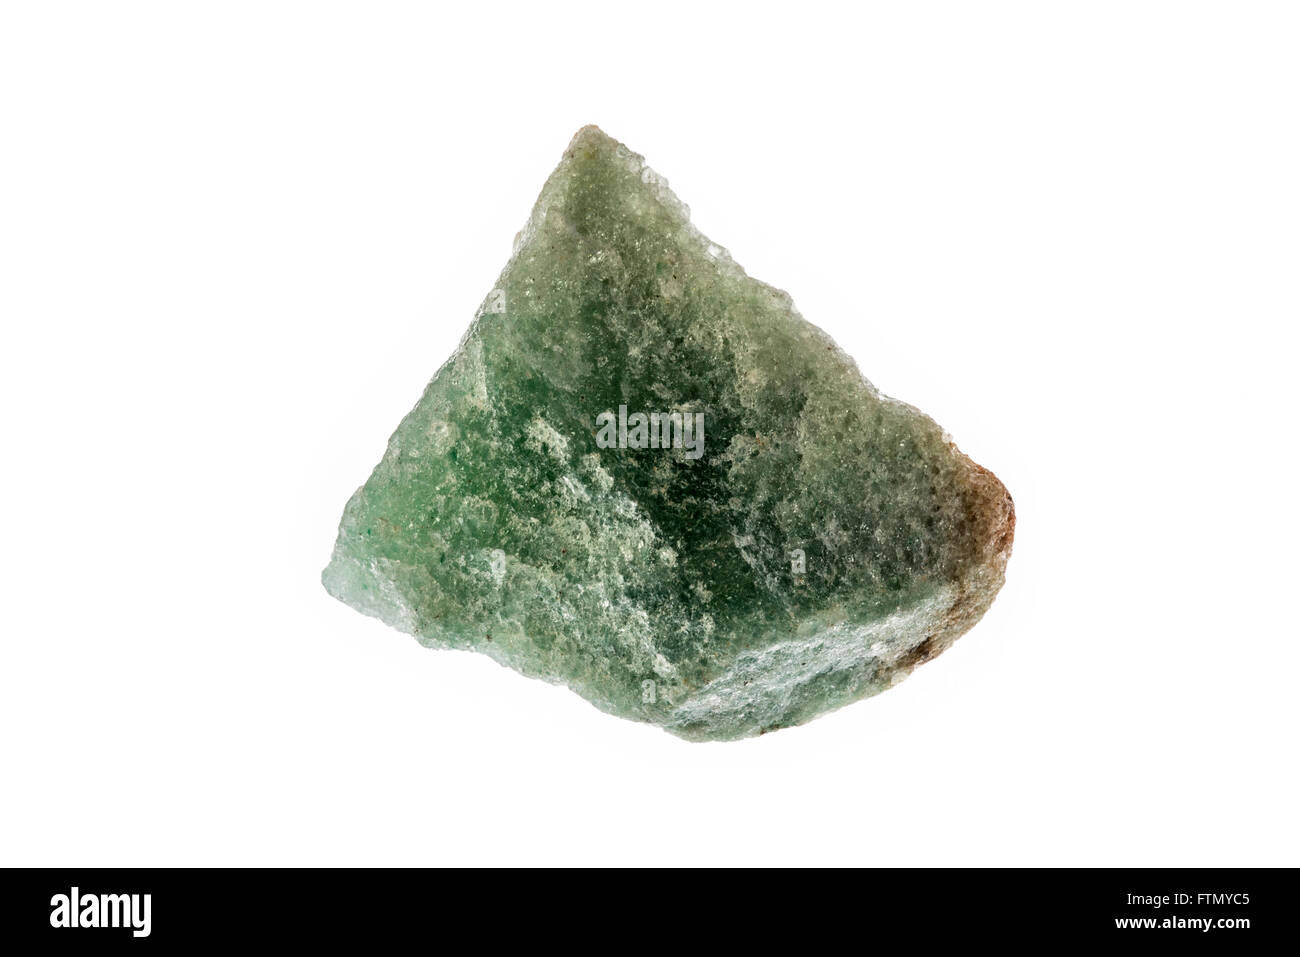 Aventurine, green quartz specimen - characterised by its translucency and presence of platy mineral inclusions Stock Photo